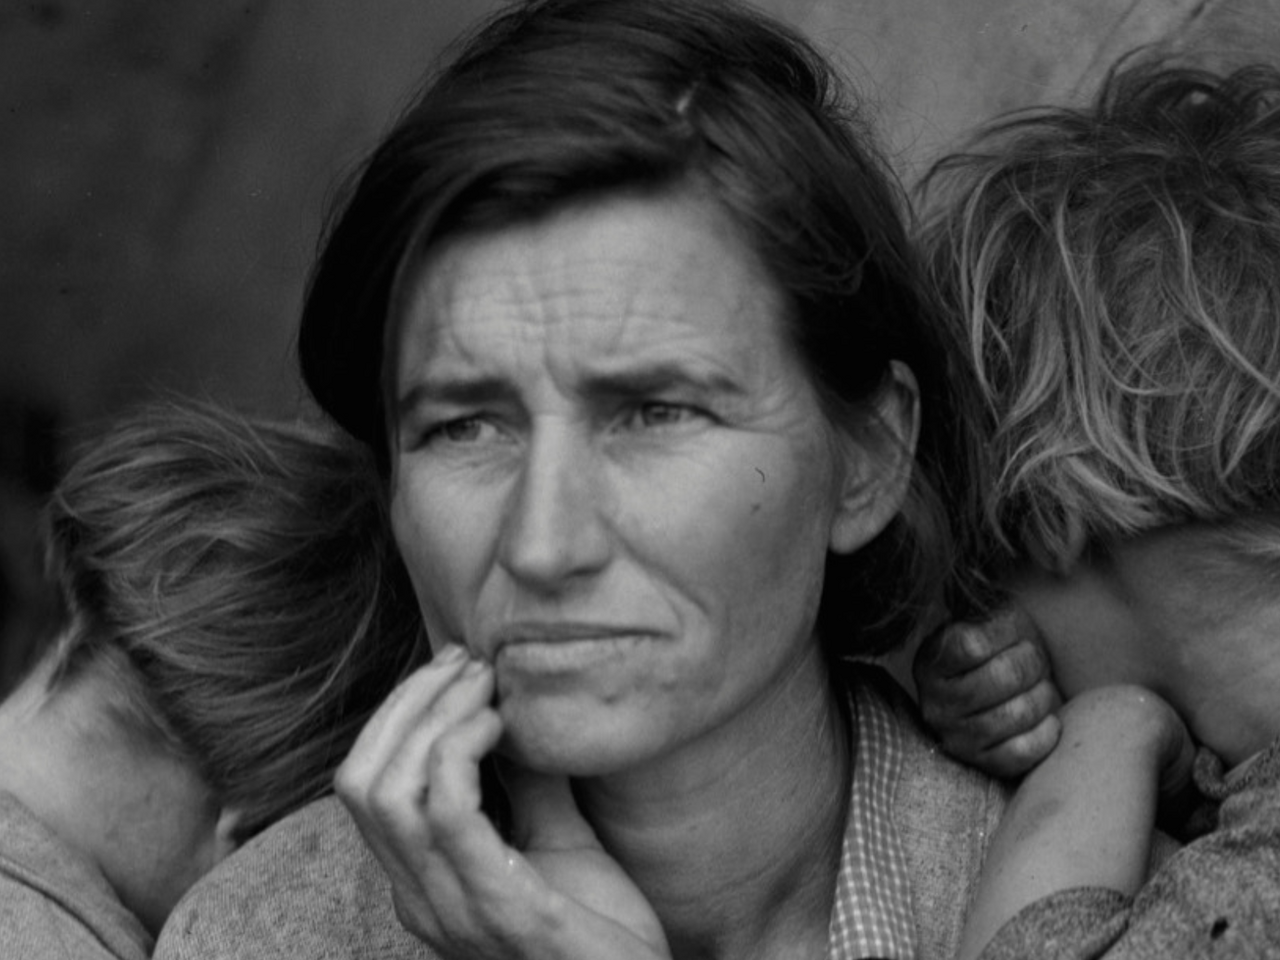 Famous black and white depression-era photo showing destitute mother with children